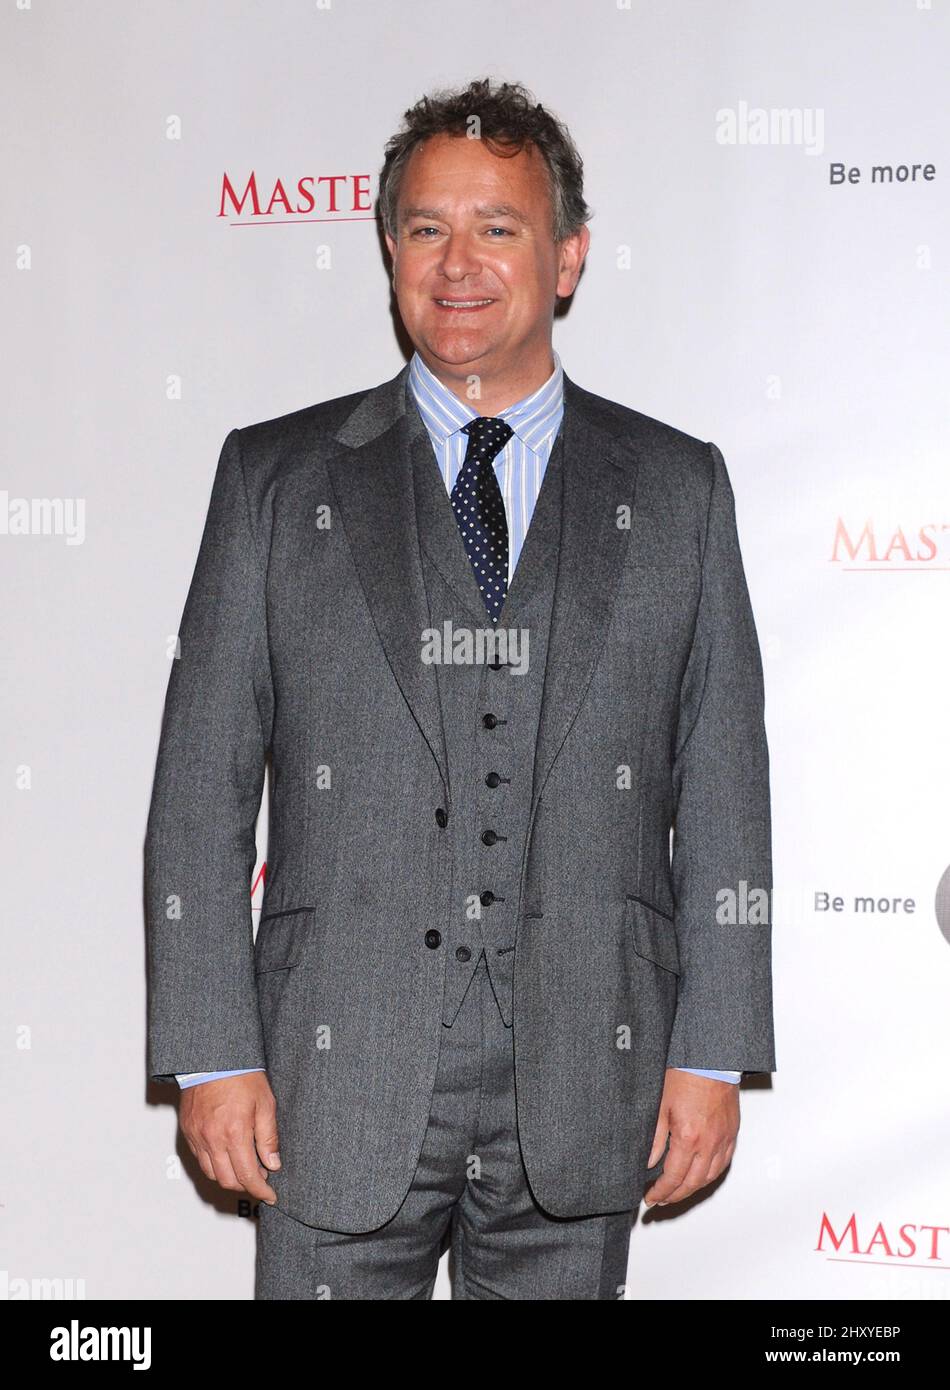 Hugh Bonneville during the 'Downton Abbey' photo call held at the Beverly Hilton Hotel, California Stock Photo